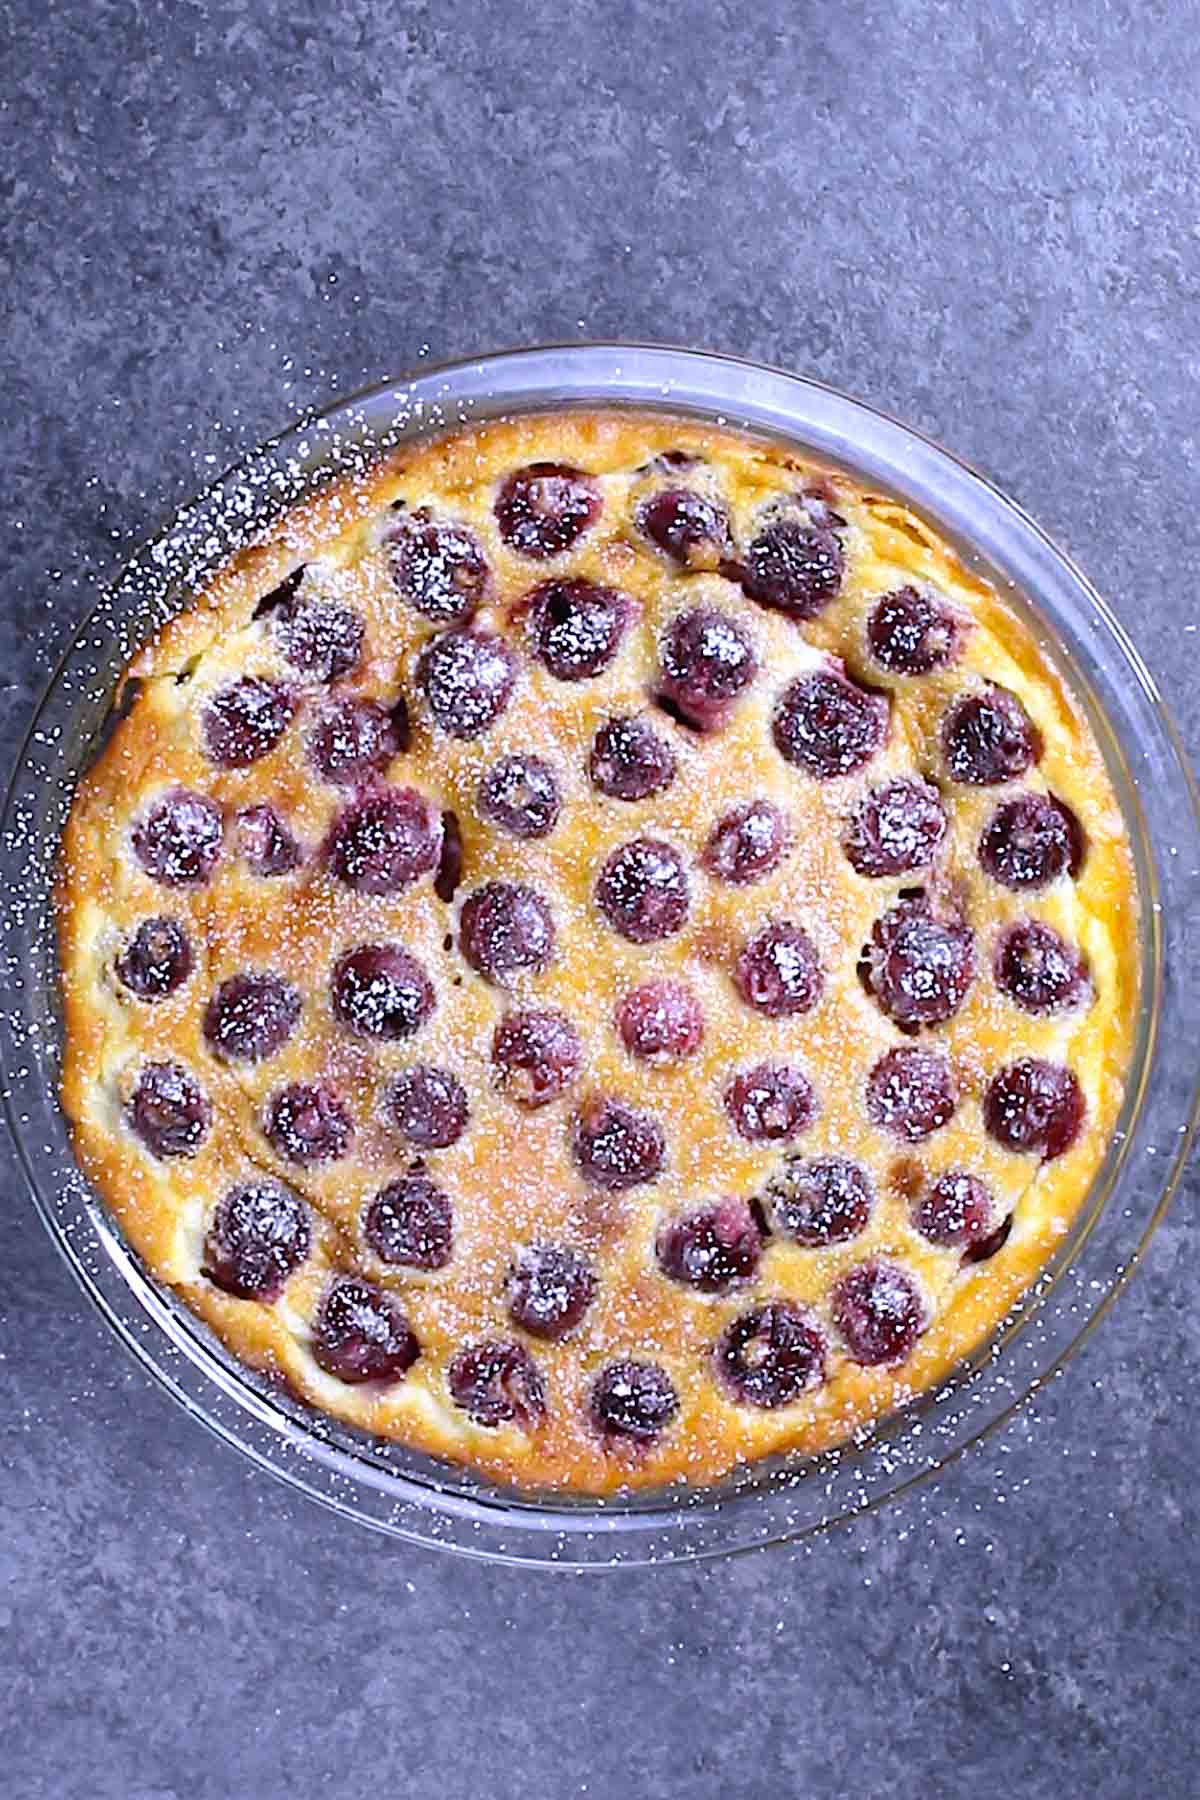 Clafoutis is a classic French dessert that is pleasing to both the eyes and taste buds. Sweet, fresh cherries are baked in a simple batter of milk, sugar, eggs, and flour. The result is a fruity, creamy dessert with a taste similar to custard. You can easily customize this recipe with other fruits like blueberry, raspberry, or apple